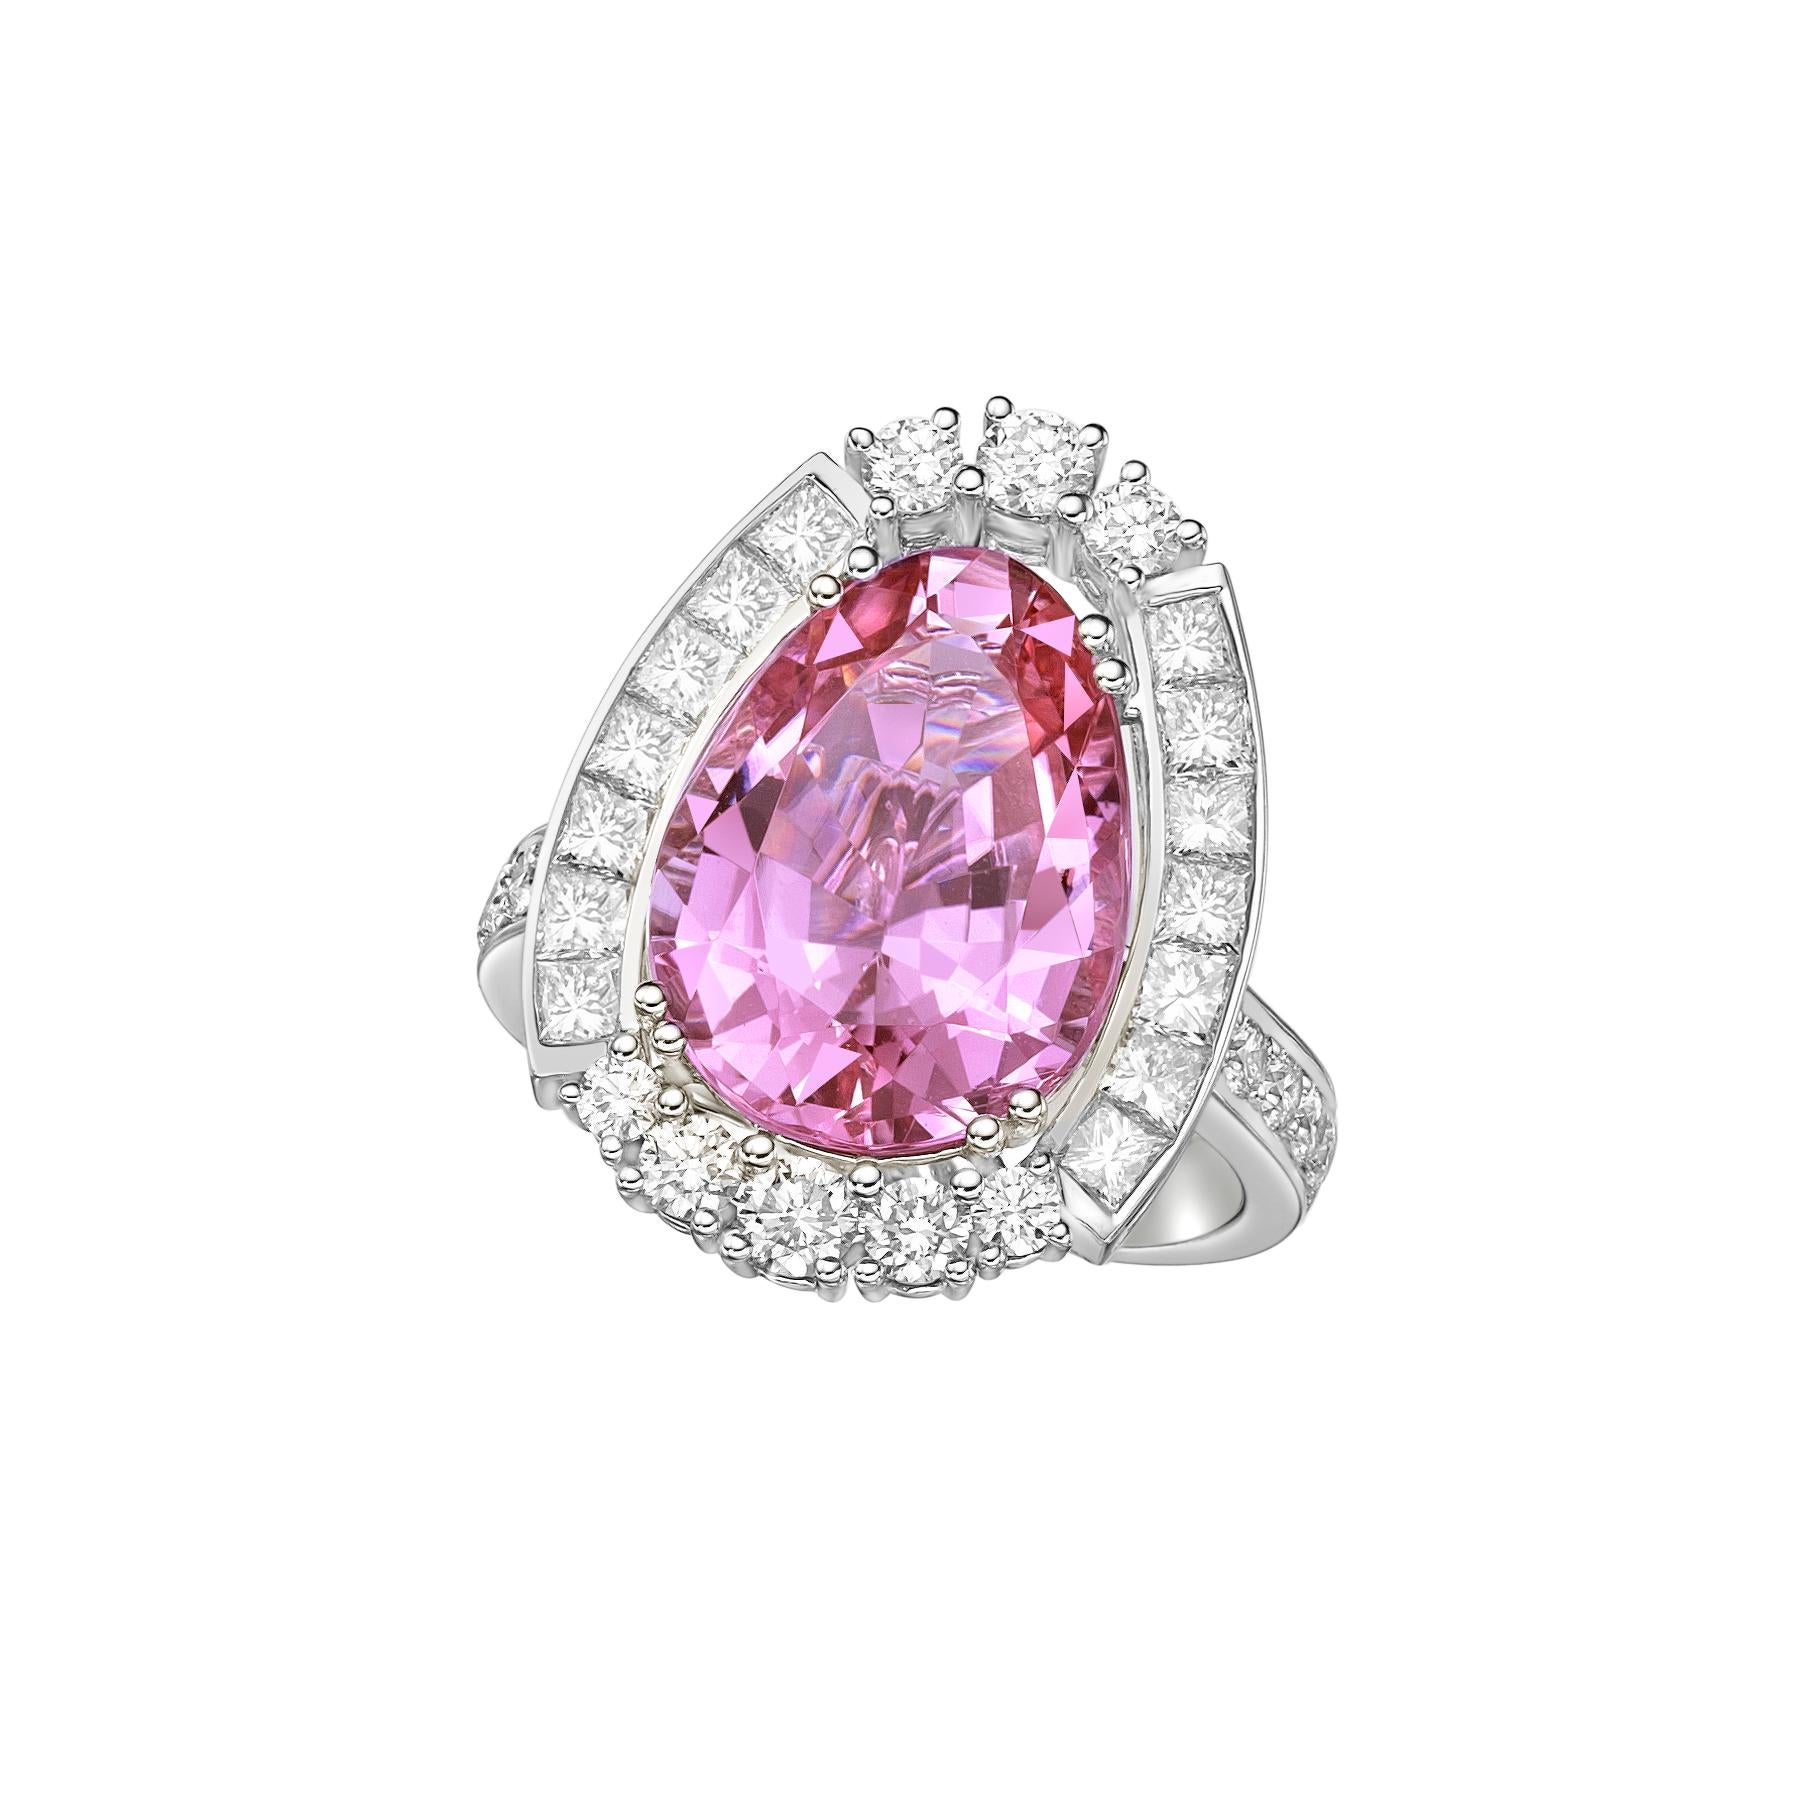 Pear Cut 7.77 Carat Pink Tourmaline Ring in 18Karat White Gold with Diamond.  For Sale